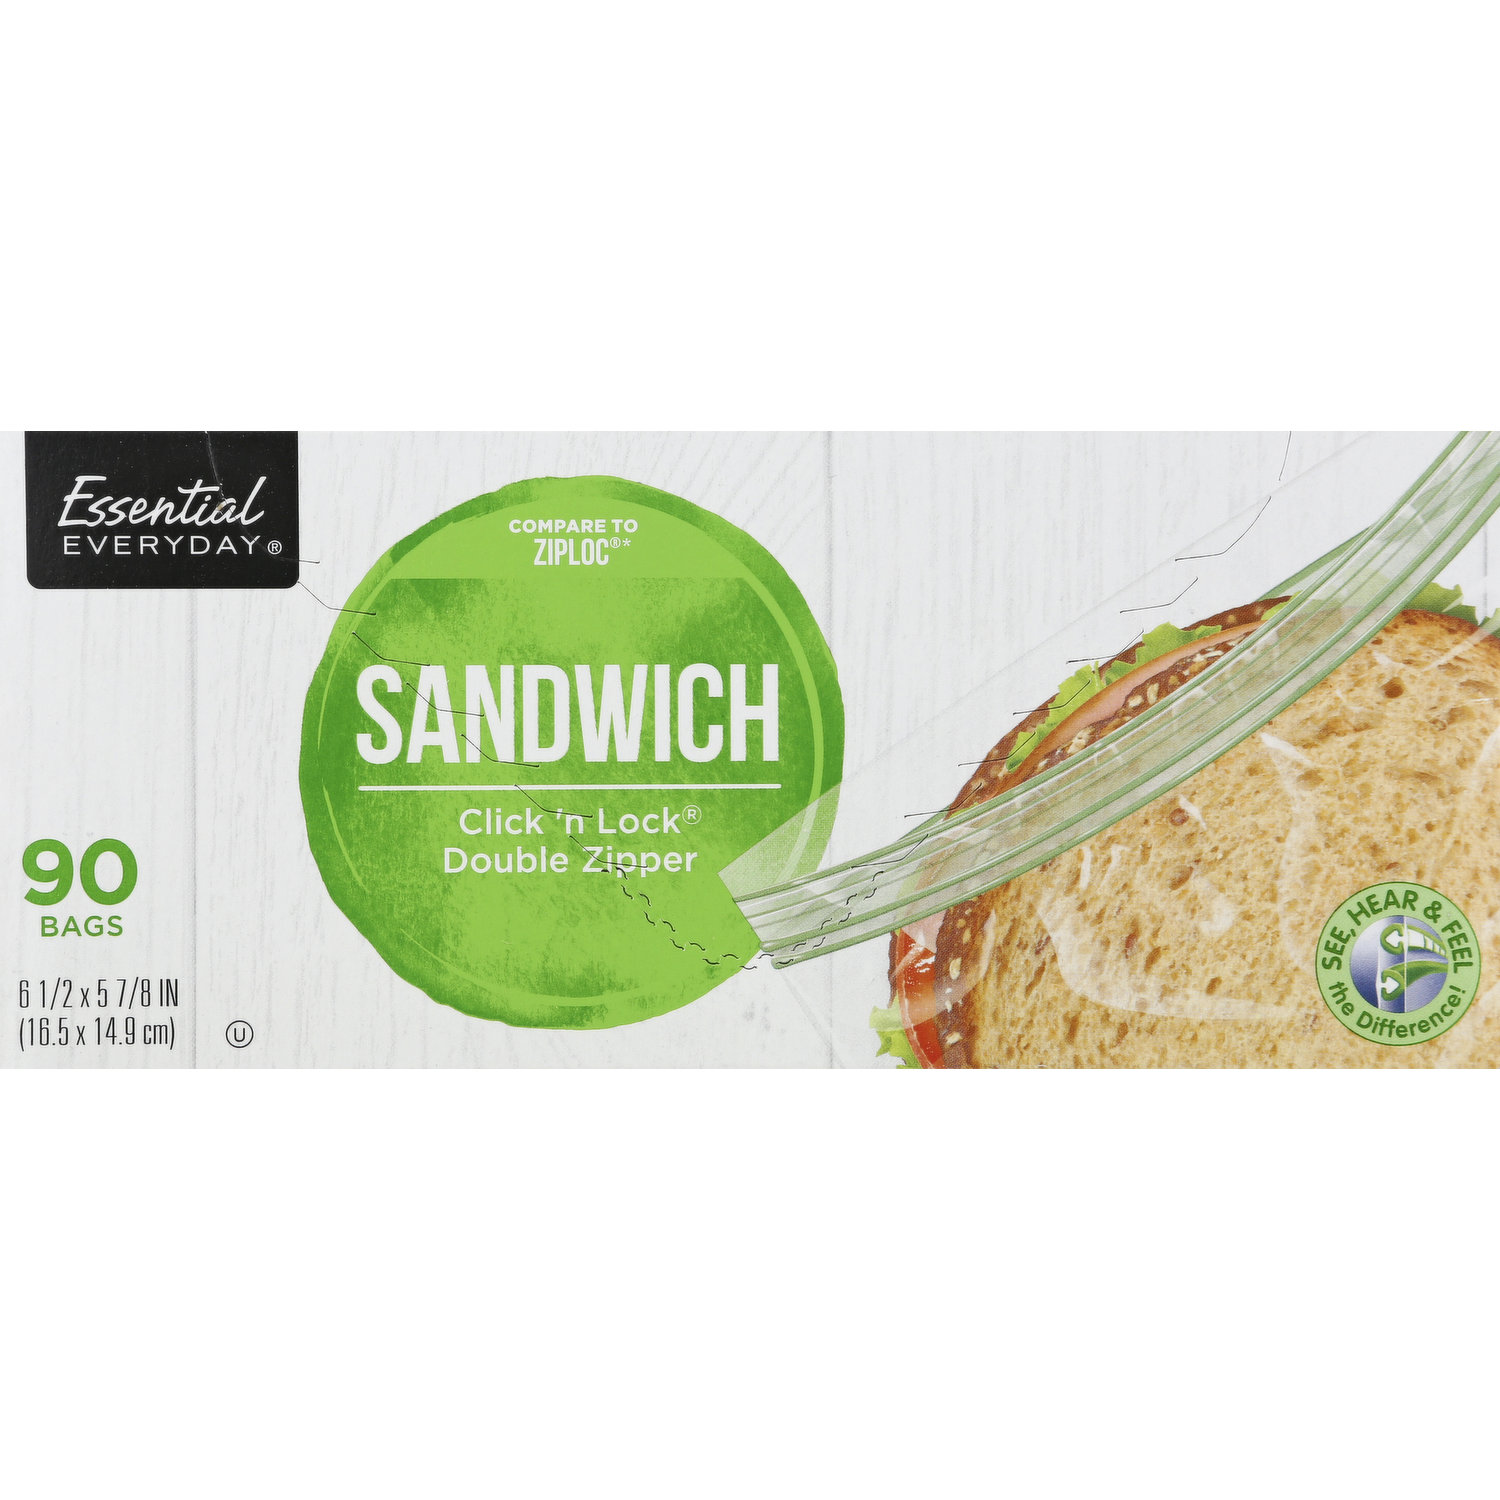 Essential Everyday Sandwich Bags, Click 'N Lock, Double Zipper 90